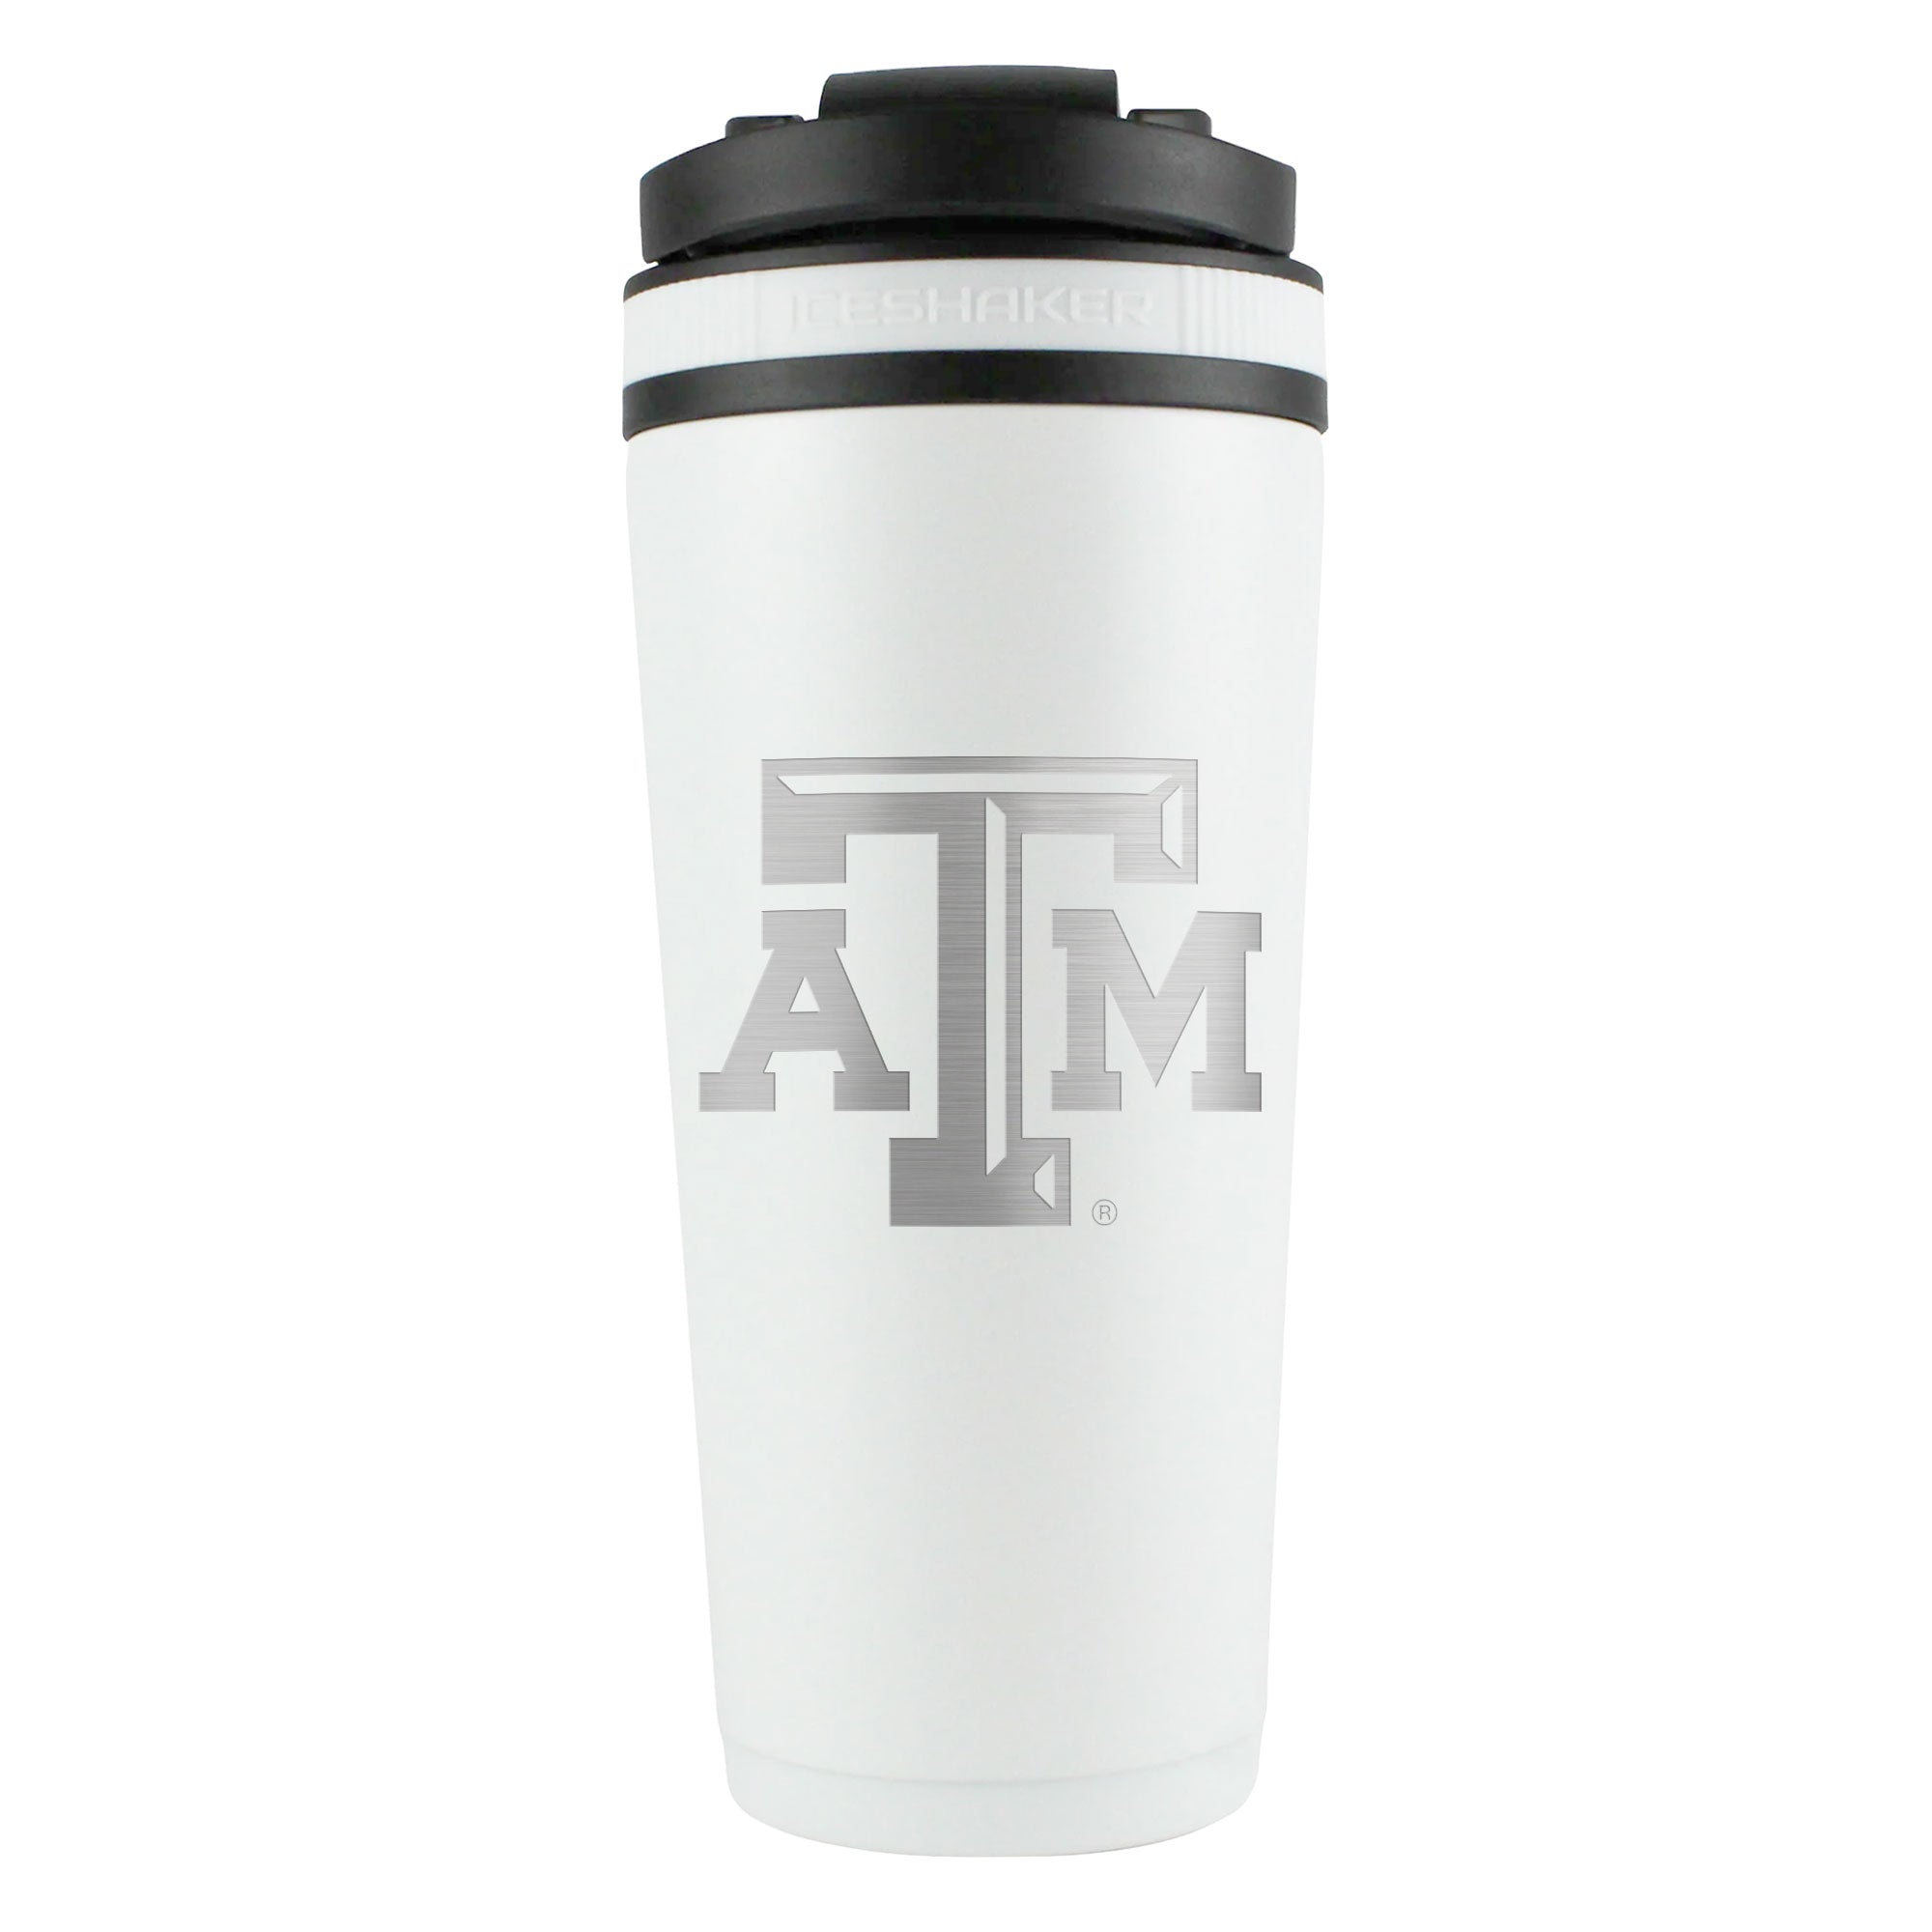 Officially Licensed Texas A&M University 26oz Ice Shaker - White